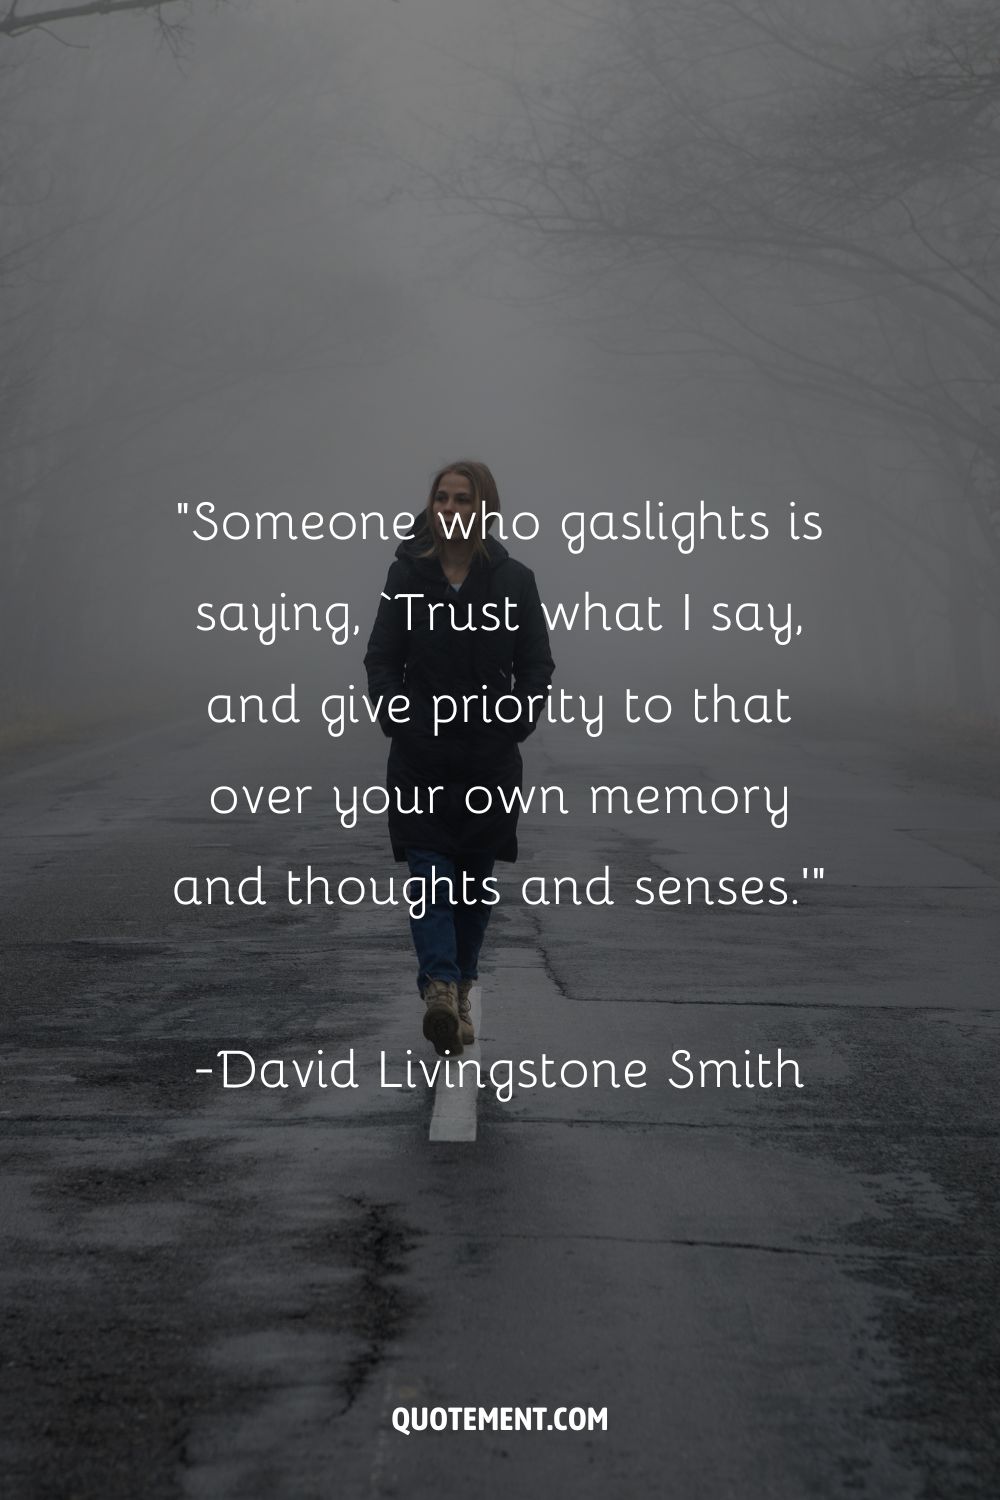 Someone who gaslights is saying, ‘Trust what I say, and give priority to that over your own memory and thoughts and senses.